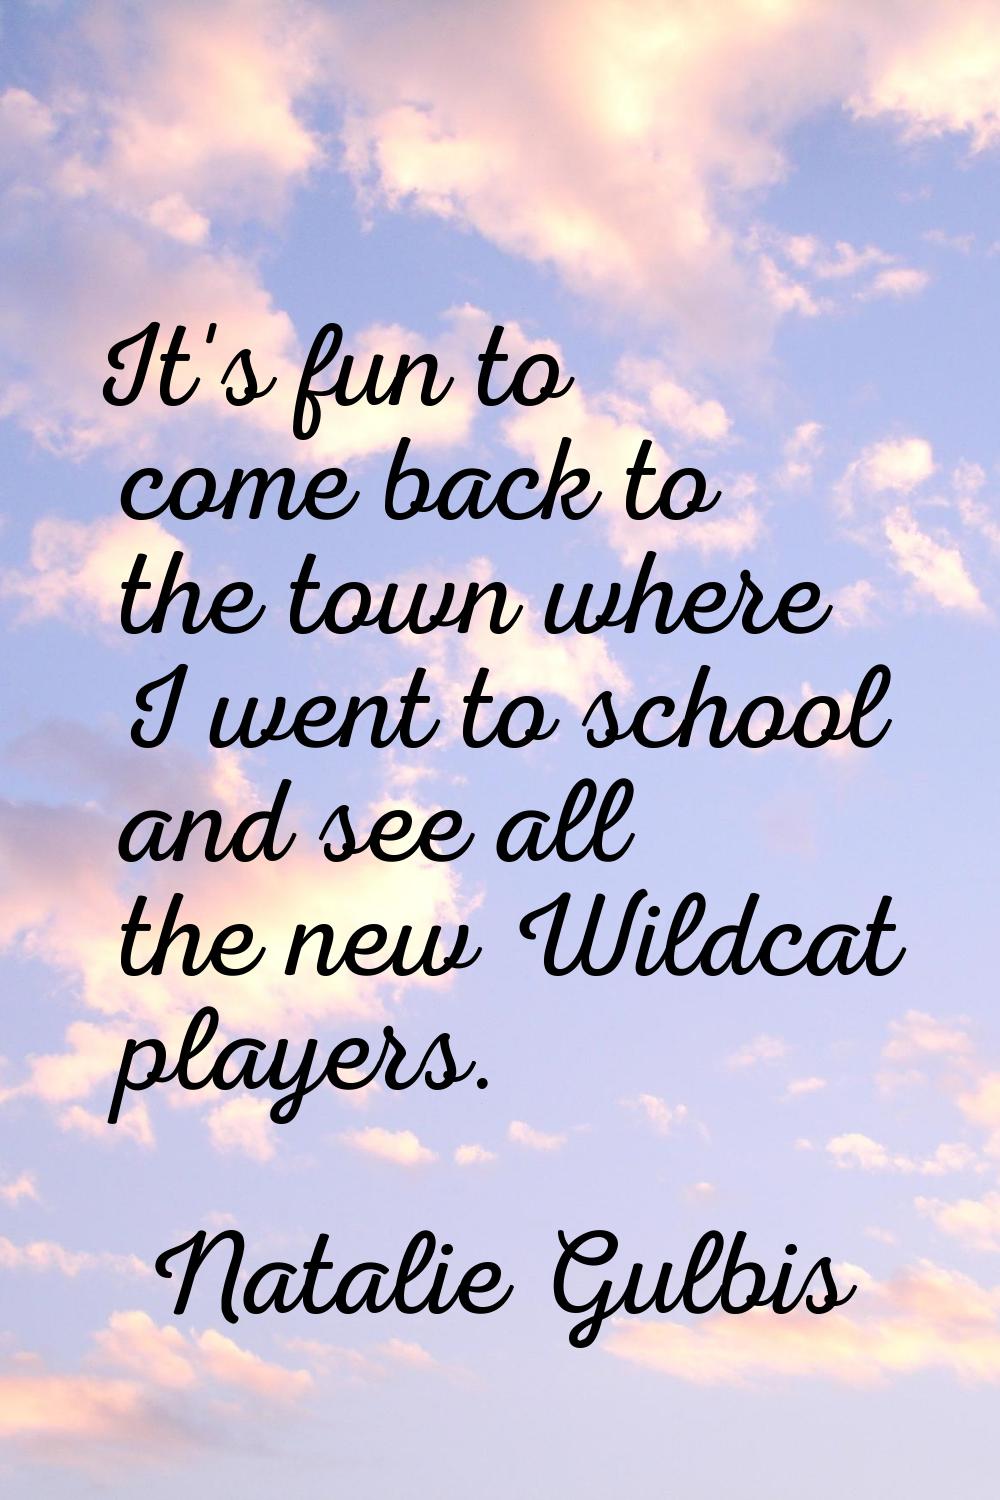 It's fun to come back to the town where I went to school and see all the new Wildcat players.